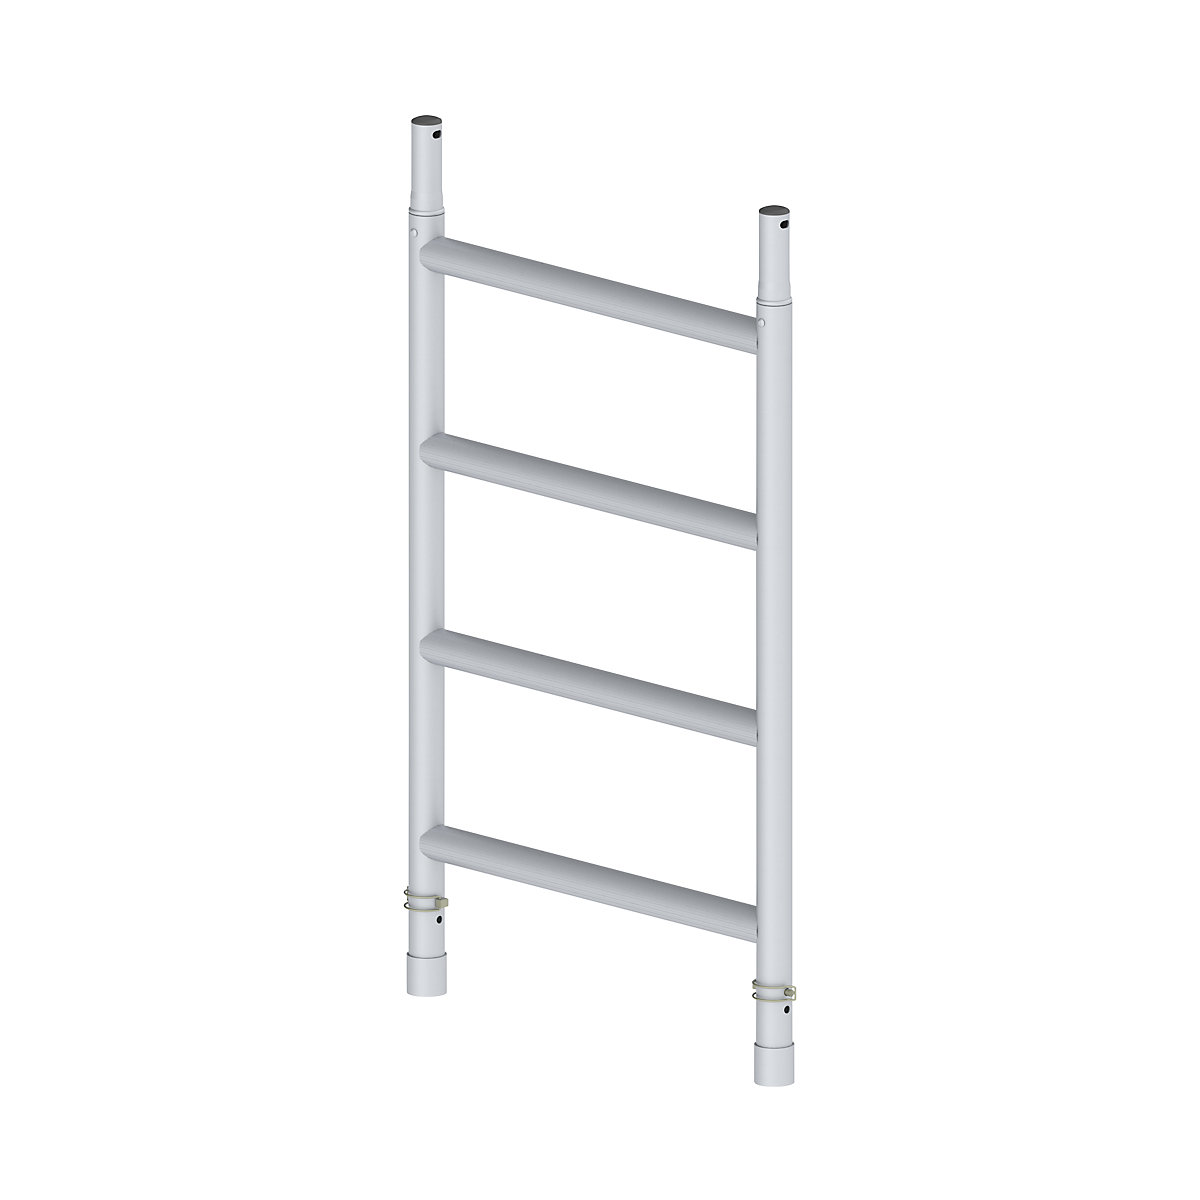 Frame – Altrex, for RS TOWER 4 series mobile access towers, for width 0.75 m, 4 cross struts-1